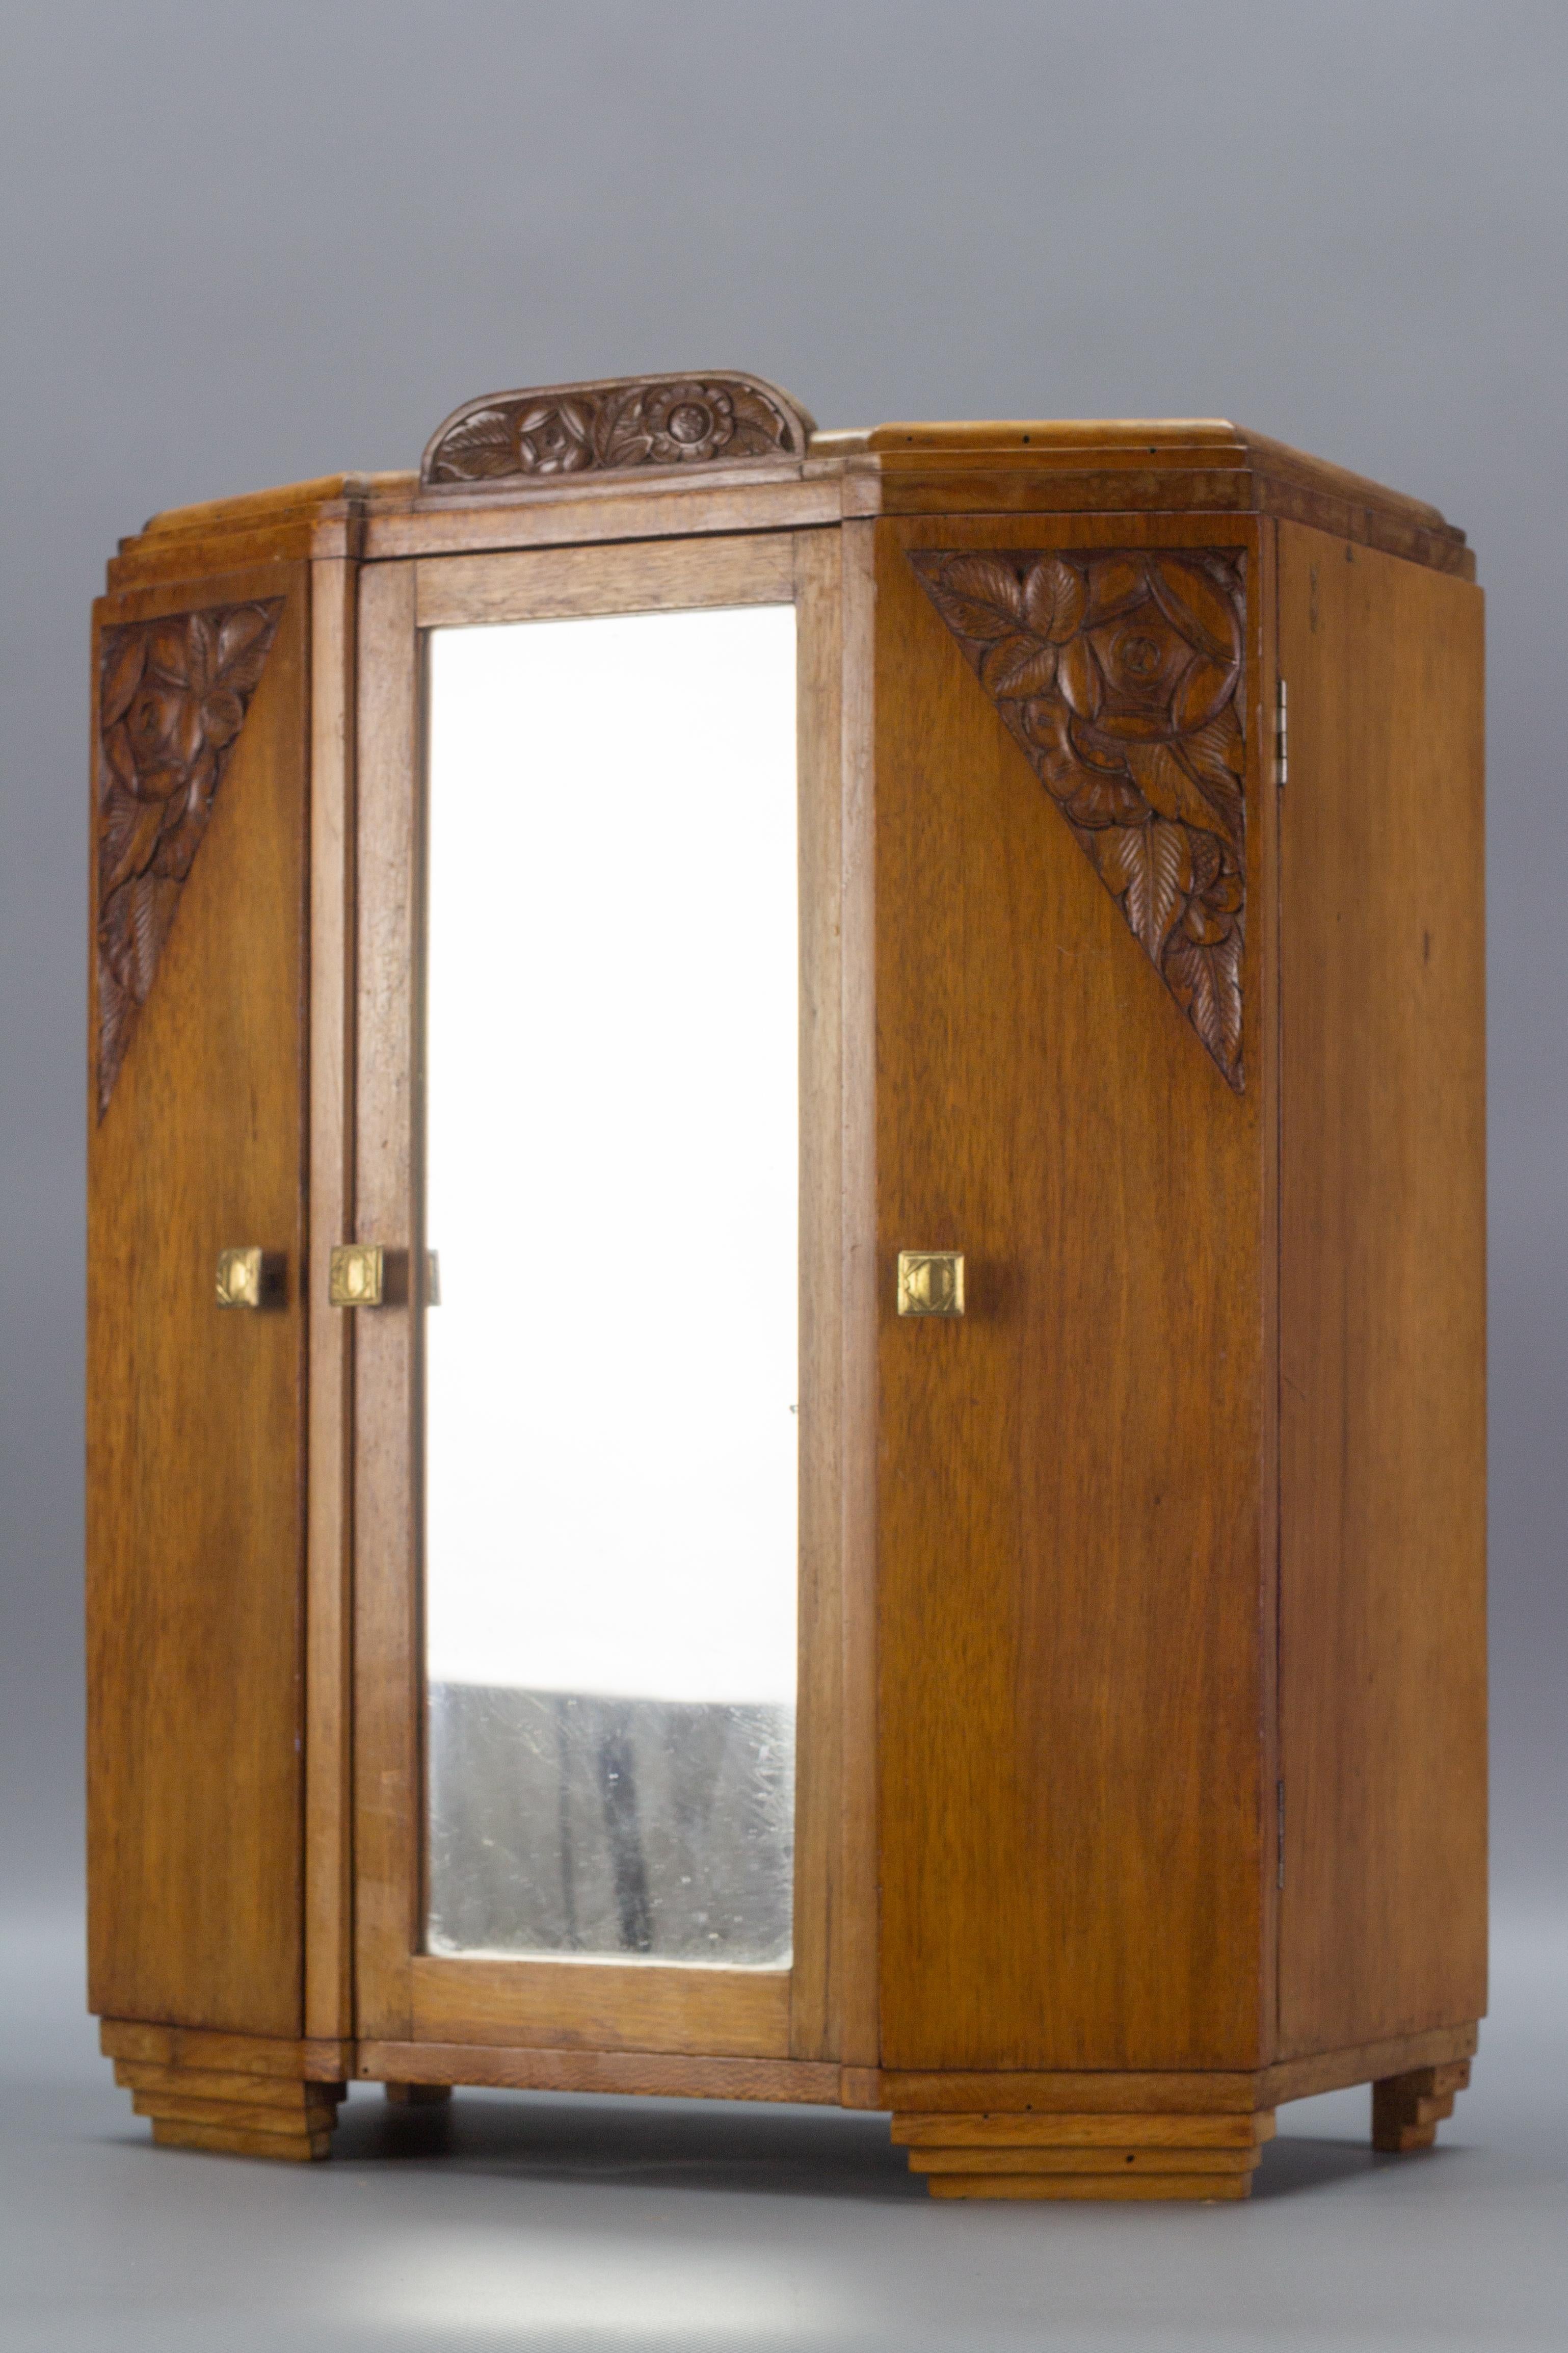 Hand-Carved Antique French Art Deco Mirrored Three-Door Prototype Miniature Armoire, 1920s For Sale